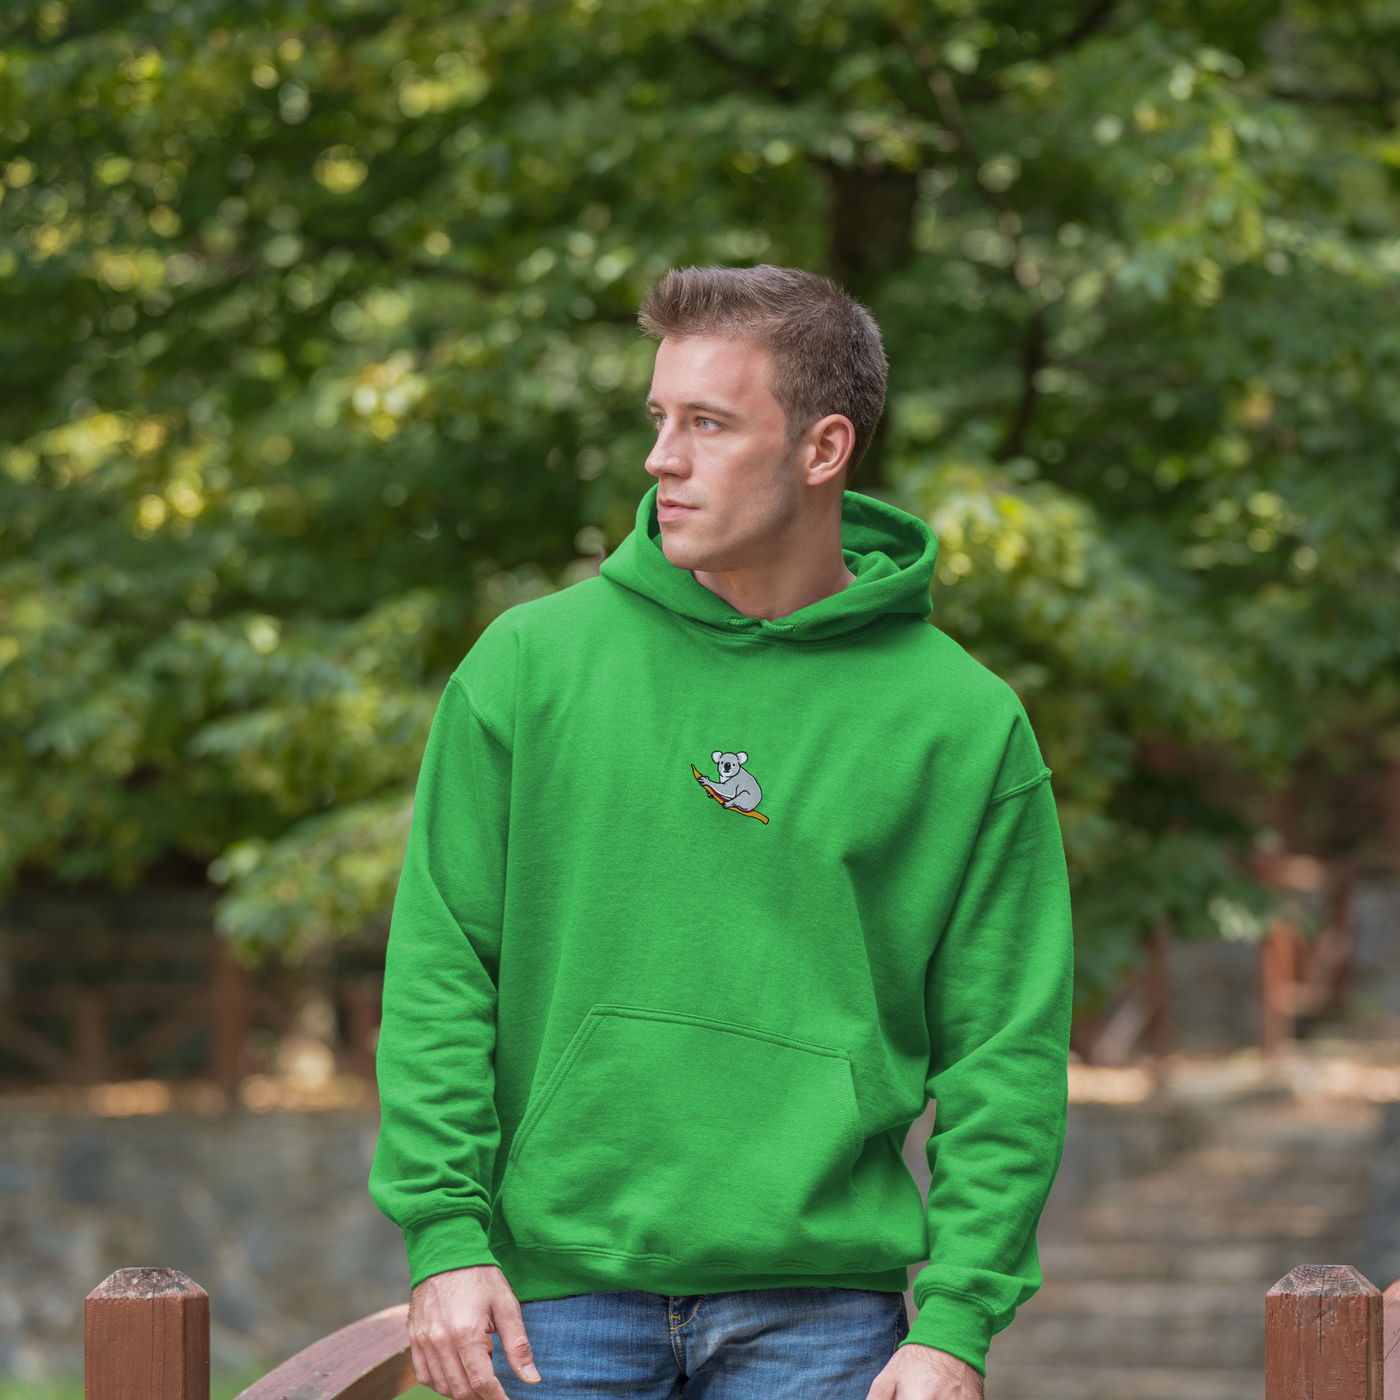 Bobby's Planet Men's Embroidered Koala Hoodie from Australia Down Under Animals Collection in Irish Green Color#color_irish-green